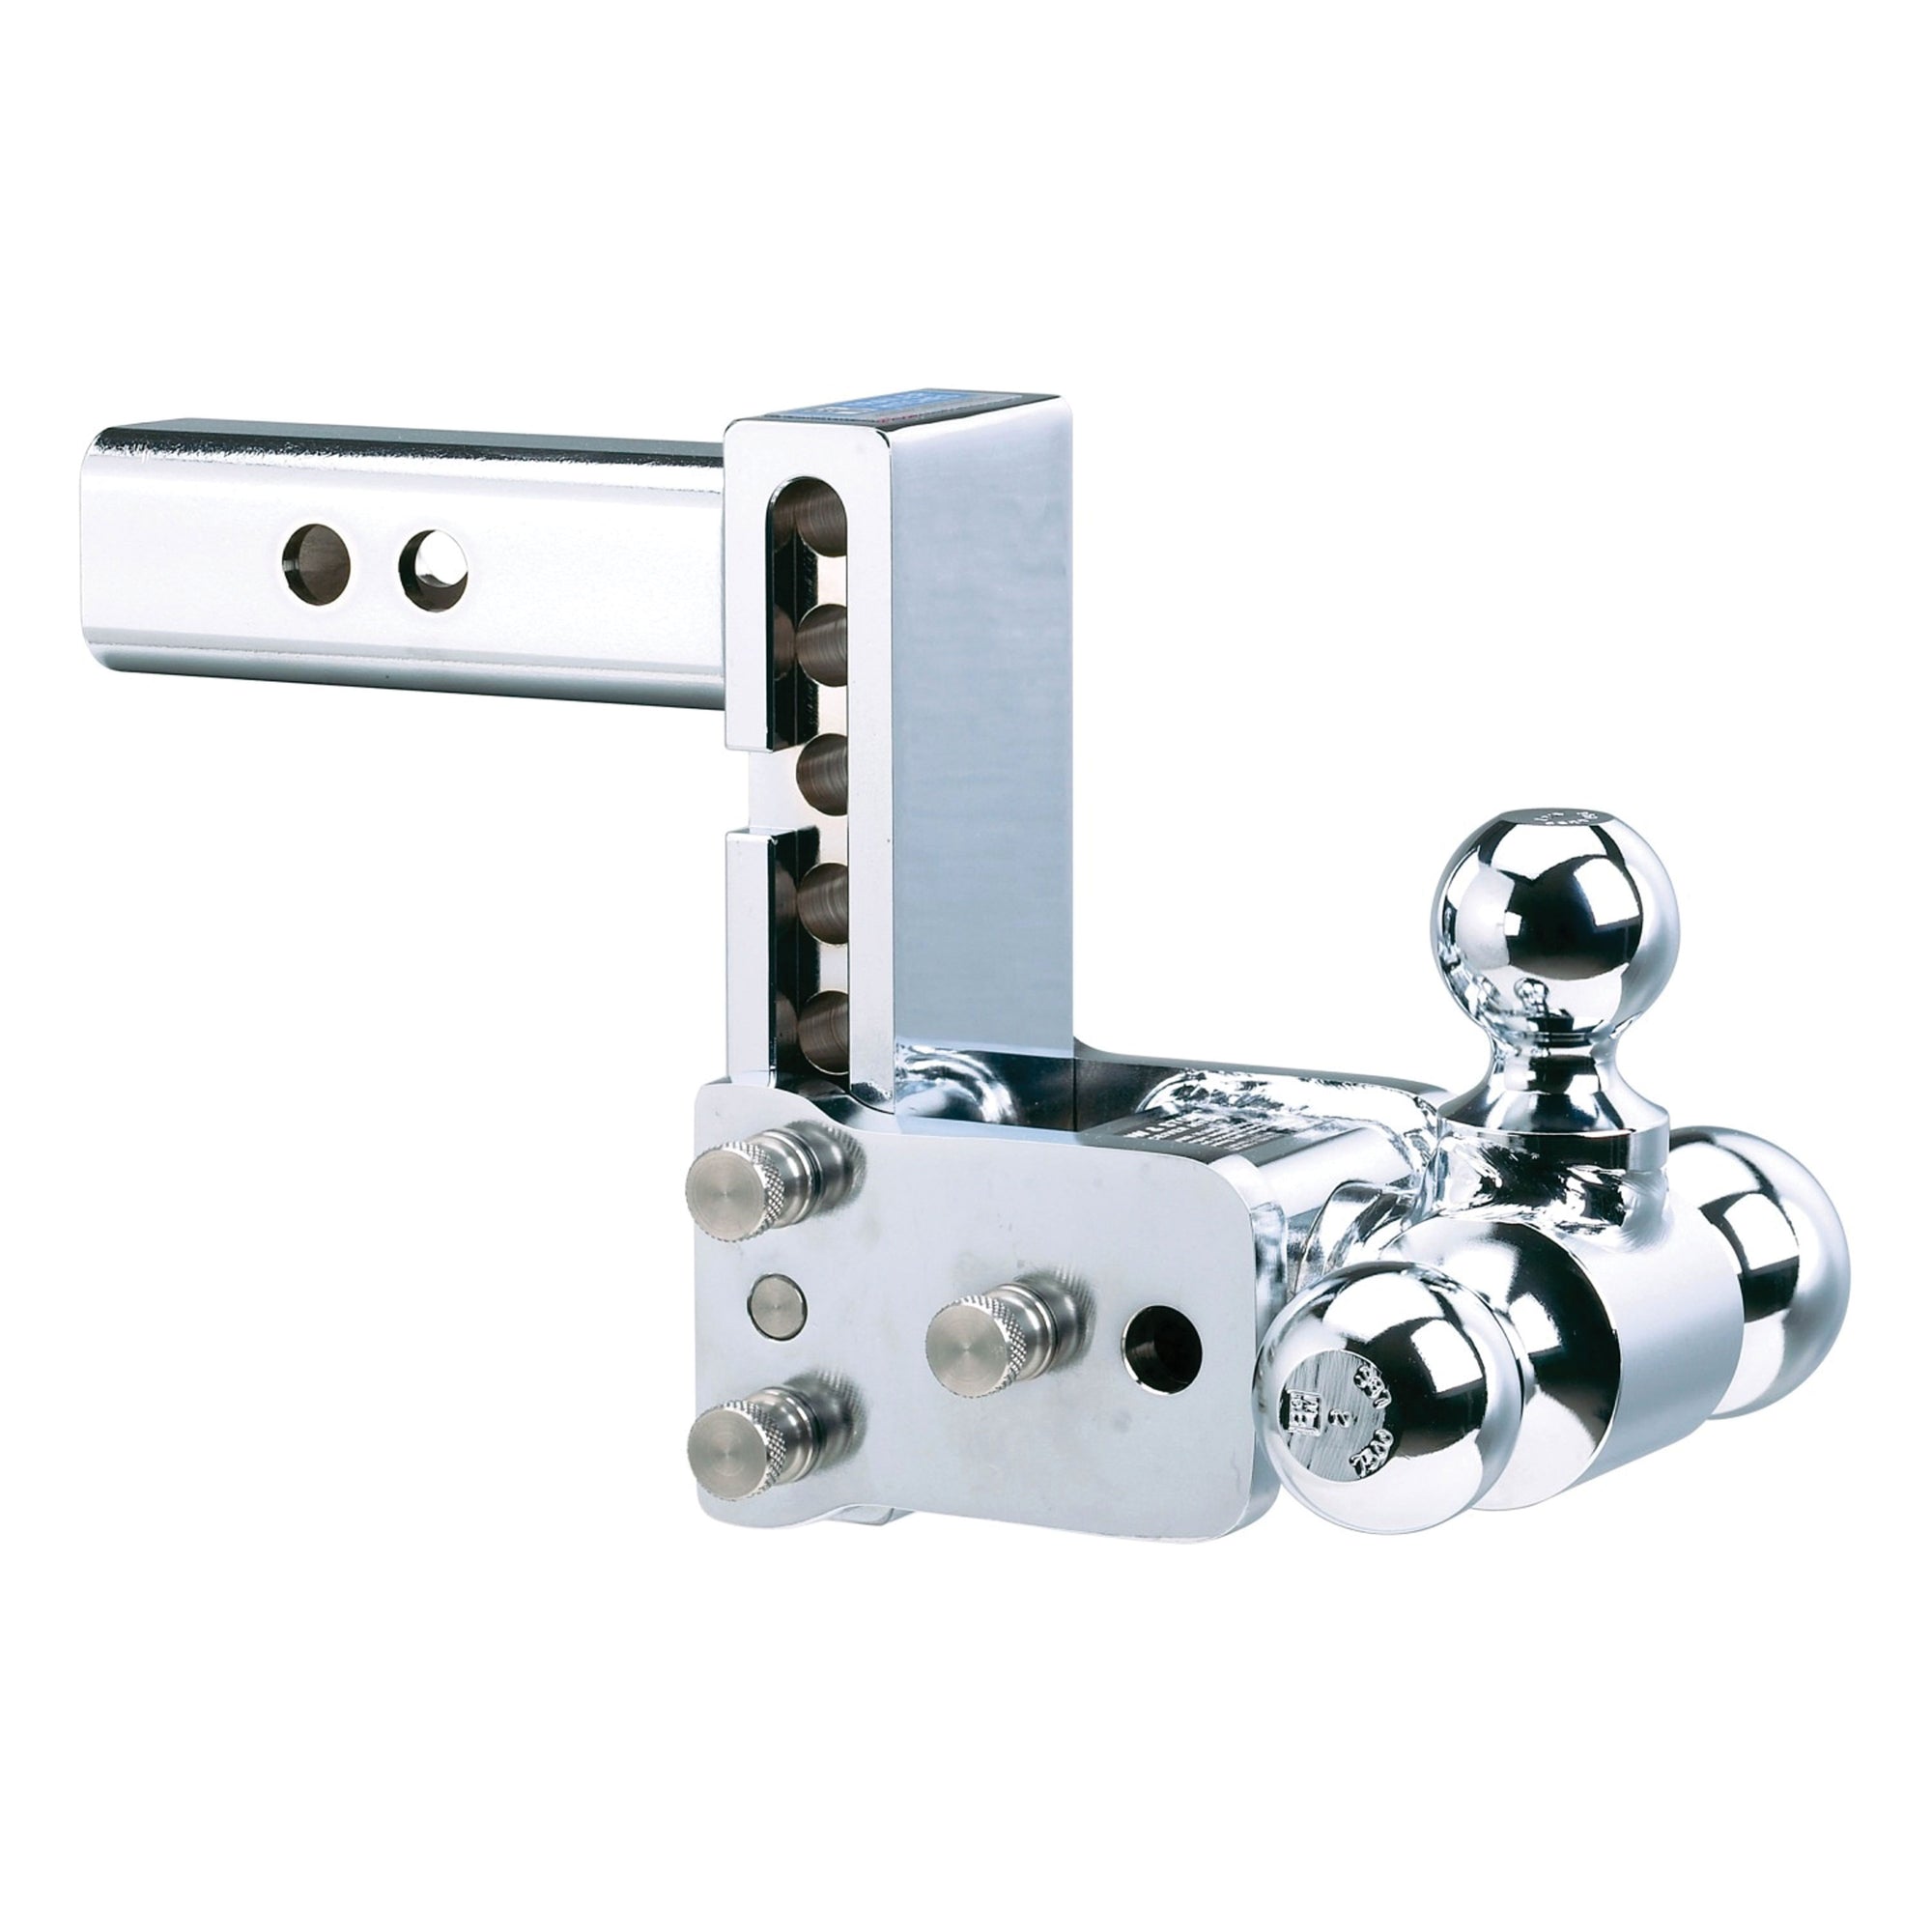 B&W Trailer Hitches TS20048C Tow and Stow Adjustable Ball Mount - 1-7/8", 2" & 2-5/16" Ball, 5" Drop, 4.5" Rise, Chrome